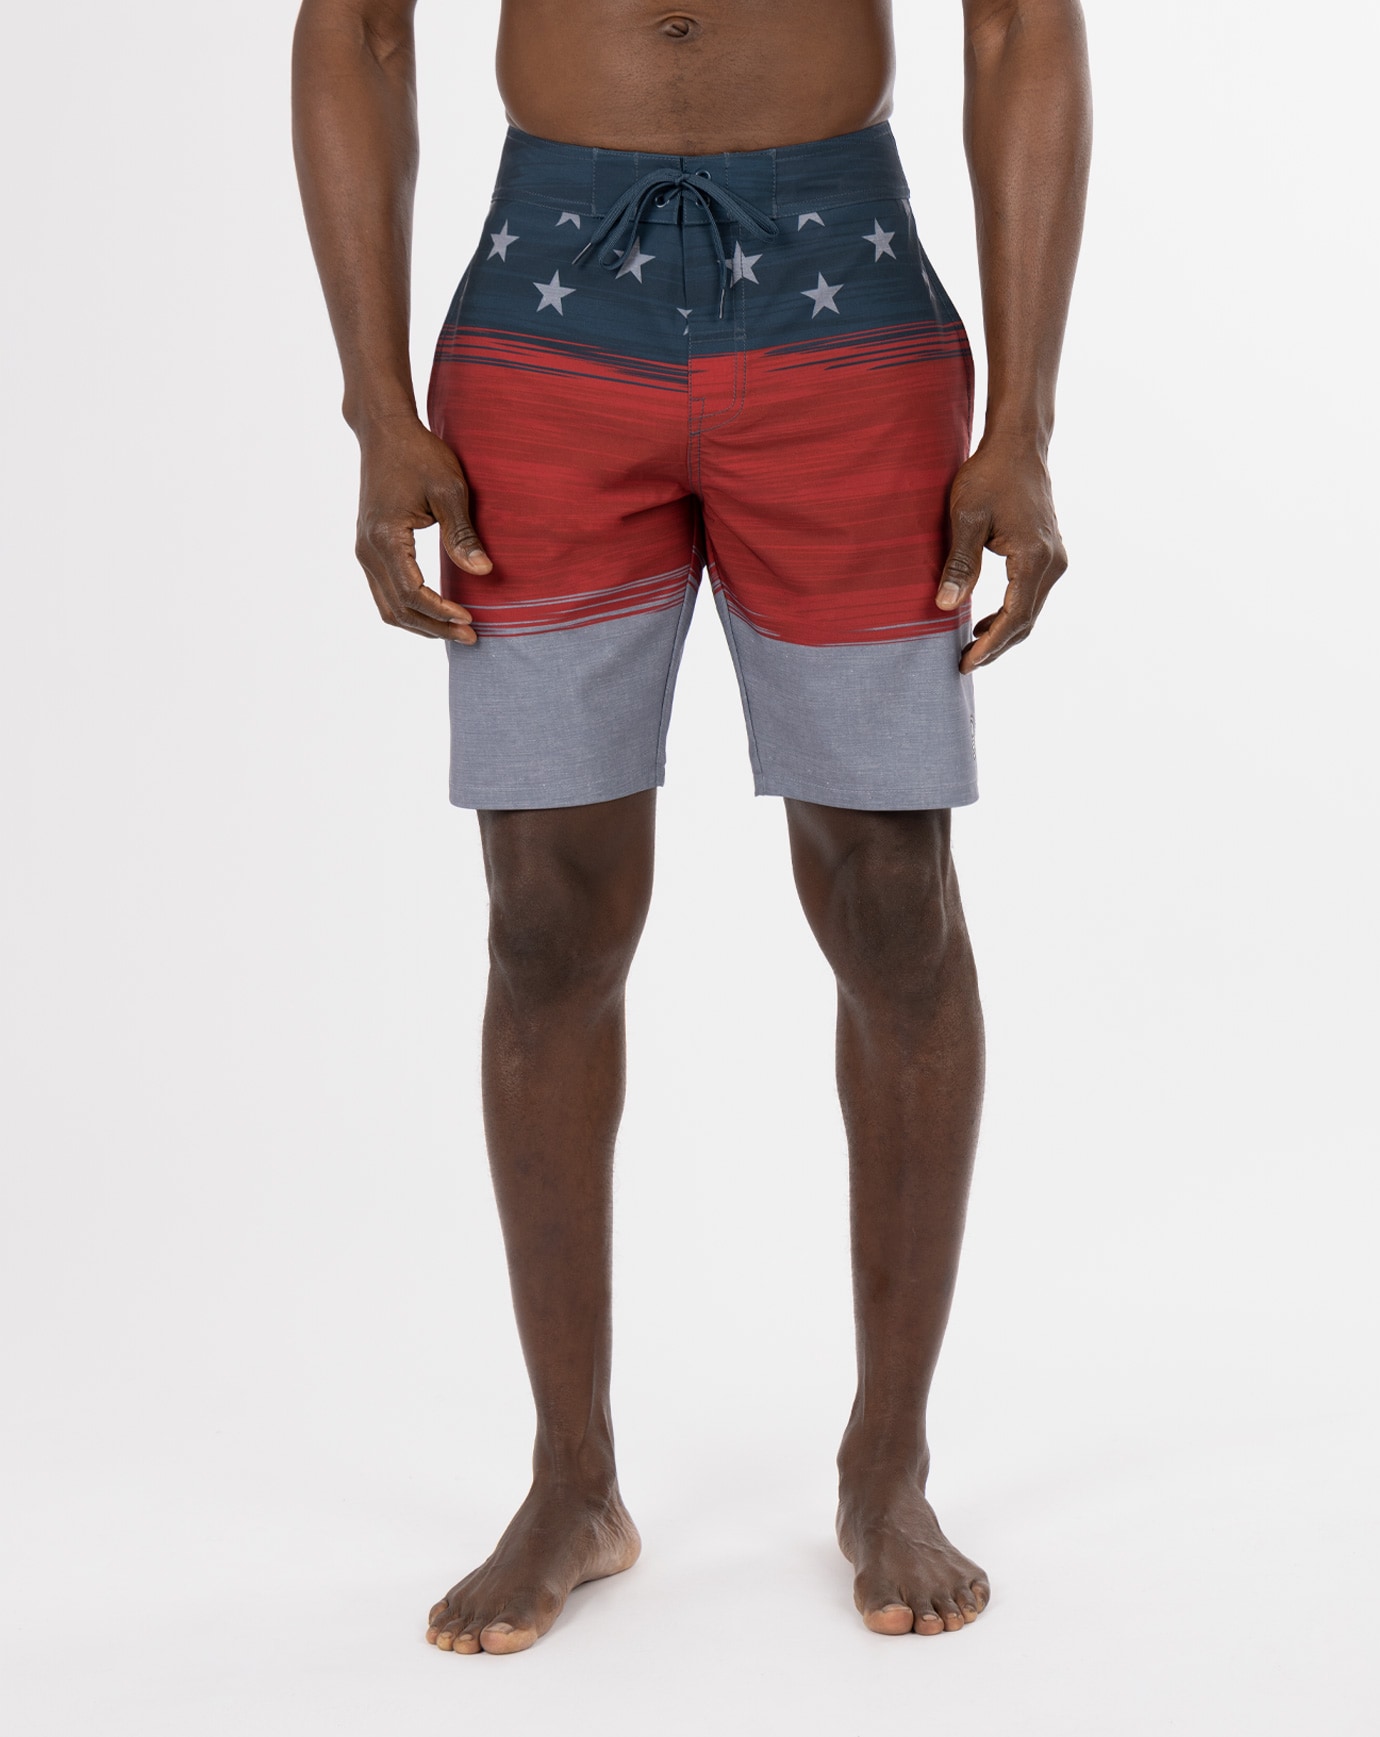 Related Product - STARBOARD SHORES BOARDSHORT